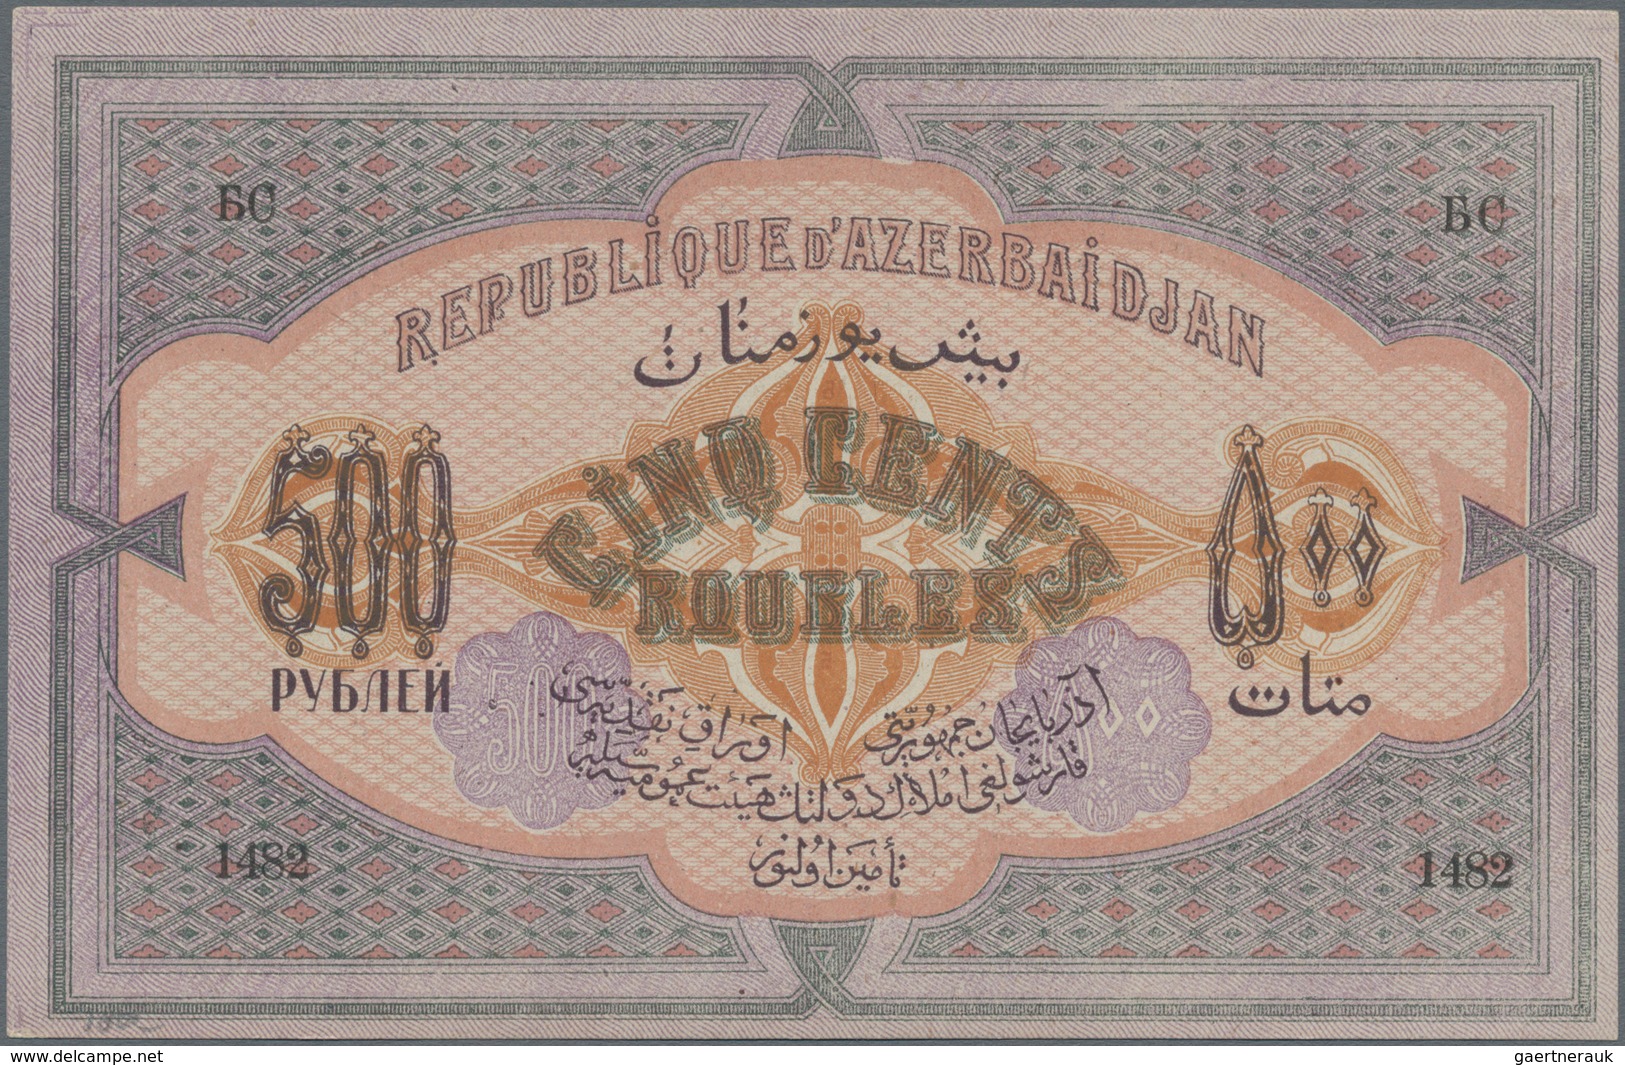 Armenia / Armenien: Set with 4 banknotes Armenia and Azerbaijan with 50, 100, 250 and 500 Rubles P.3